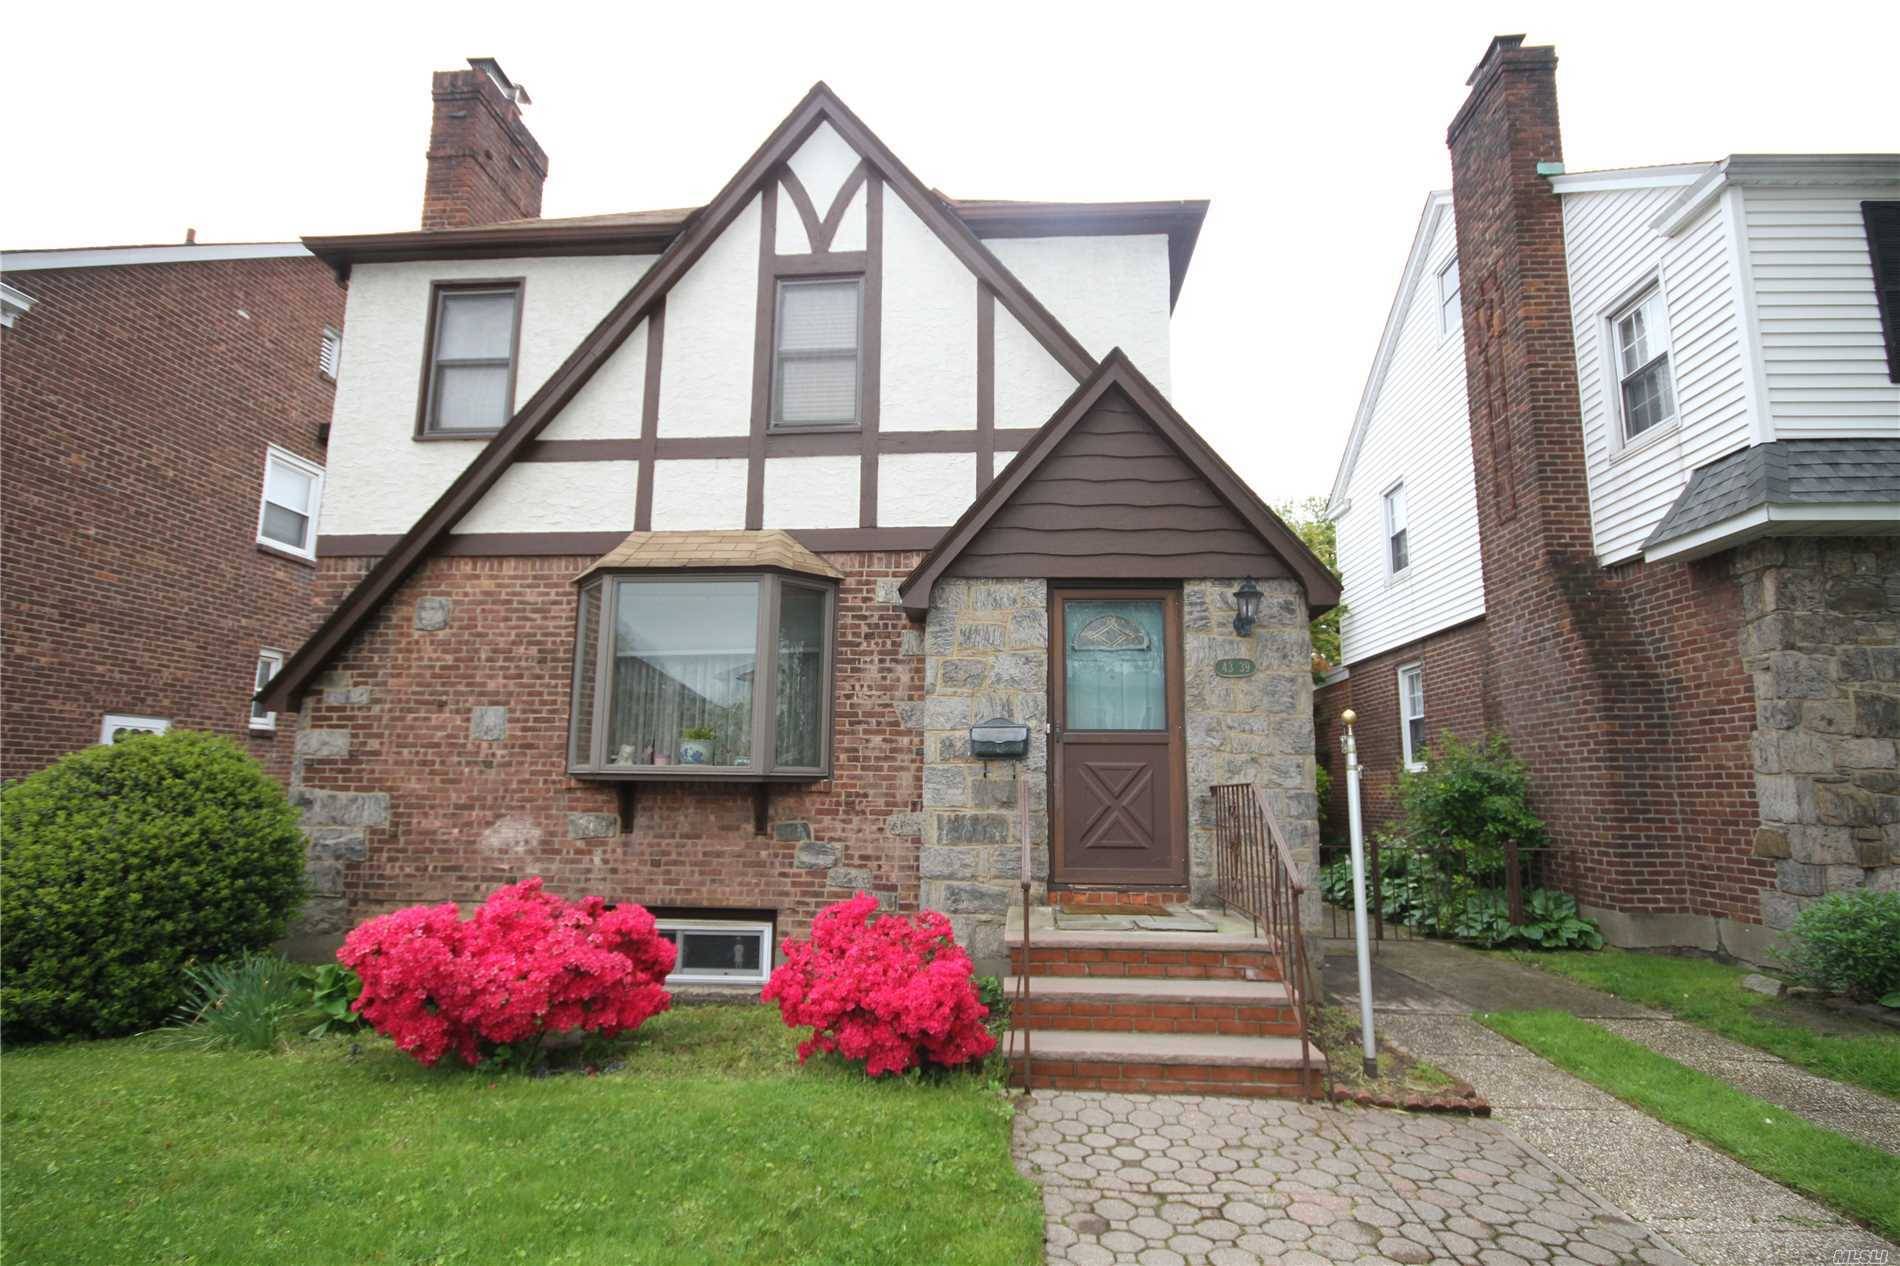 Sold brick, detached, Tudor Colonial in a great Auburndale location a half block from Northern Blvd.